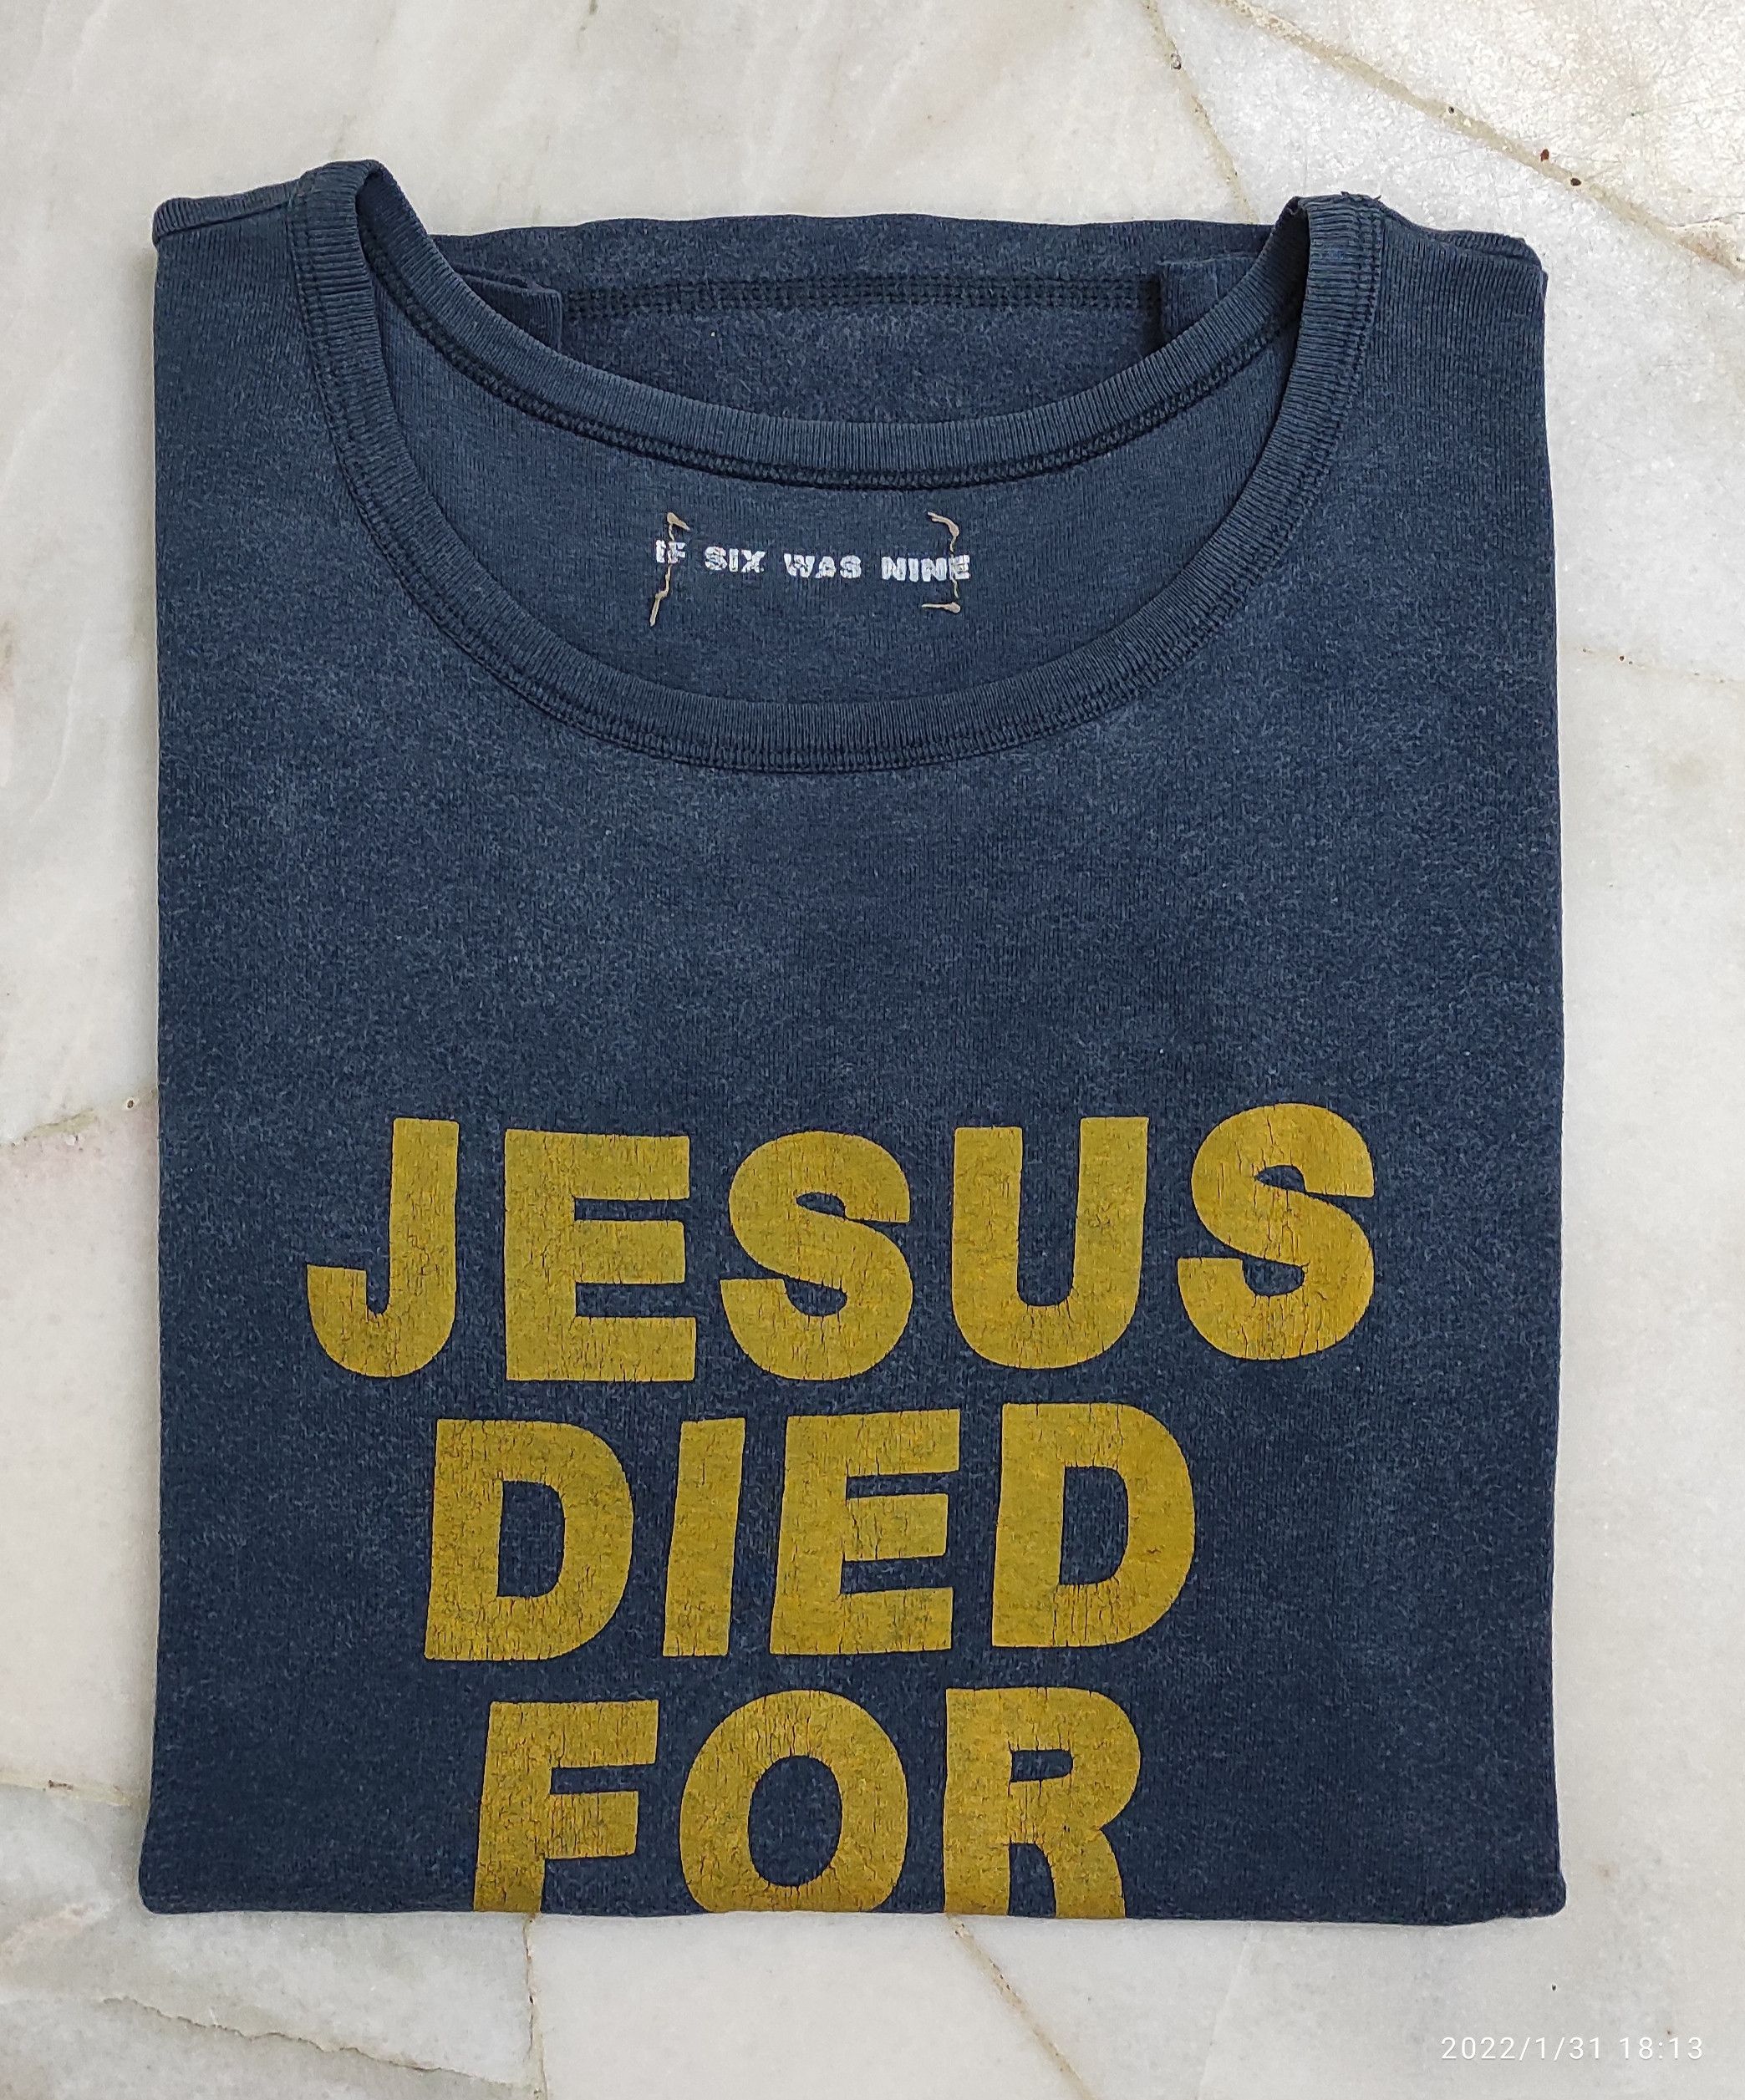 Archival Clothing Archive IF SIX WAS NINE JESUS DIED FOR YOU TEE 